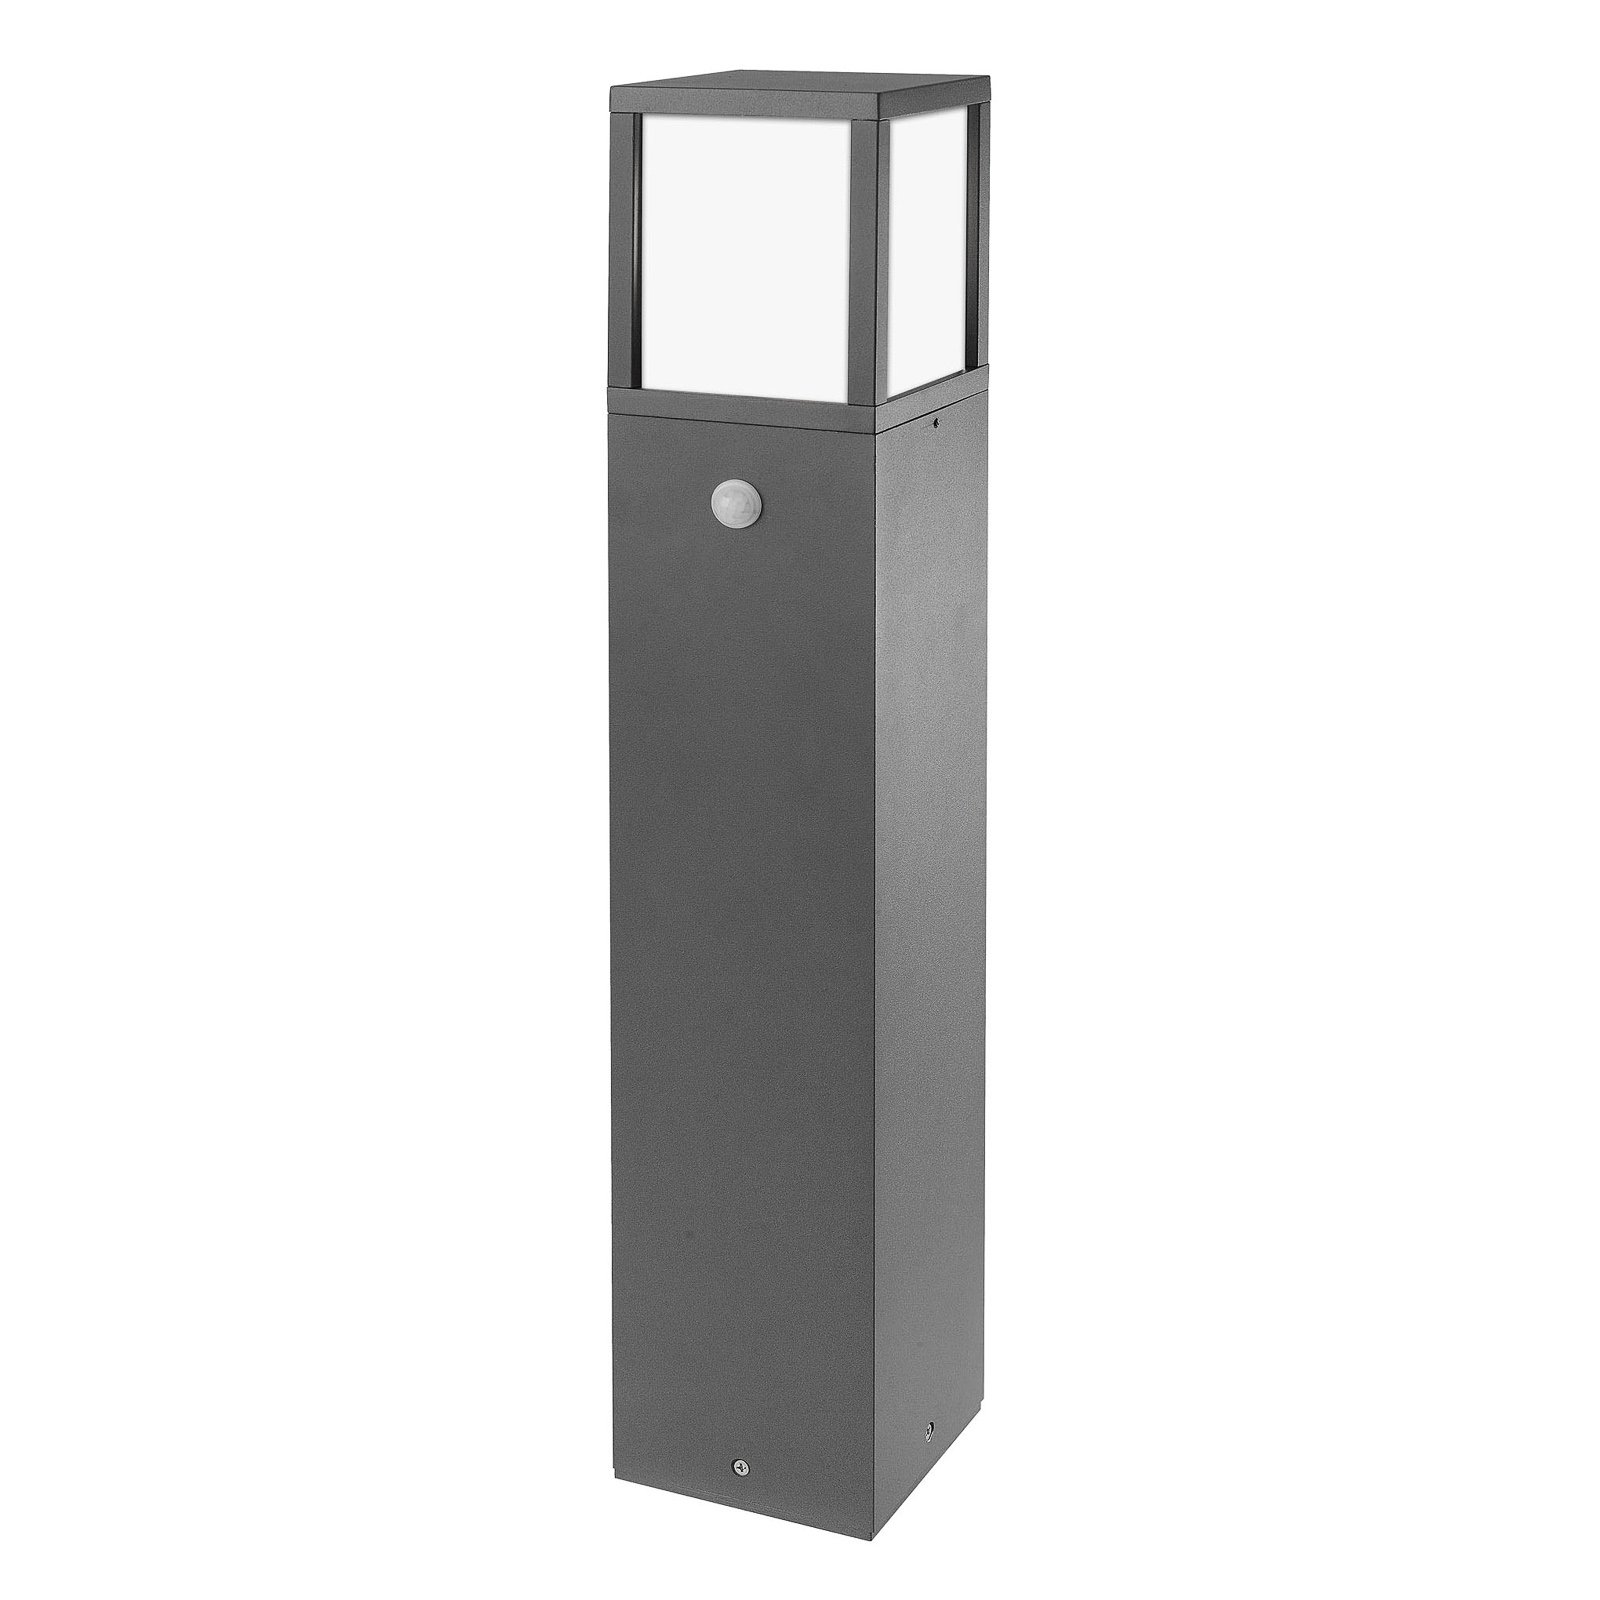 CMD 9018 path light with a motion detector